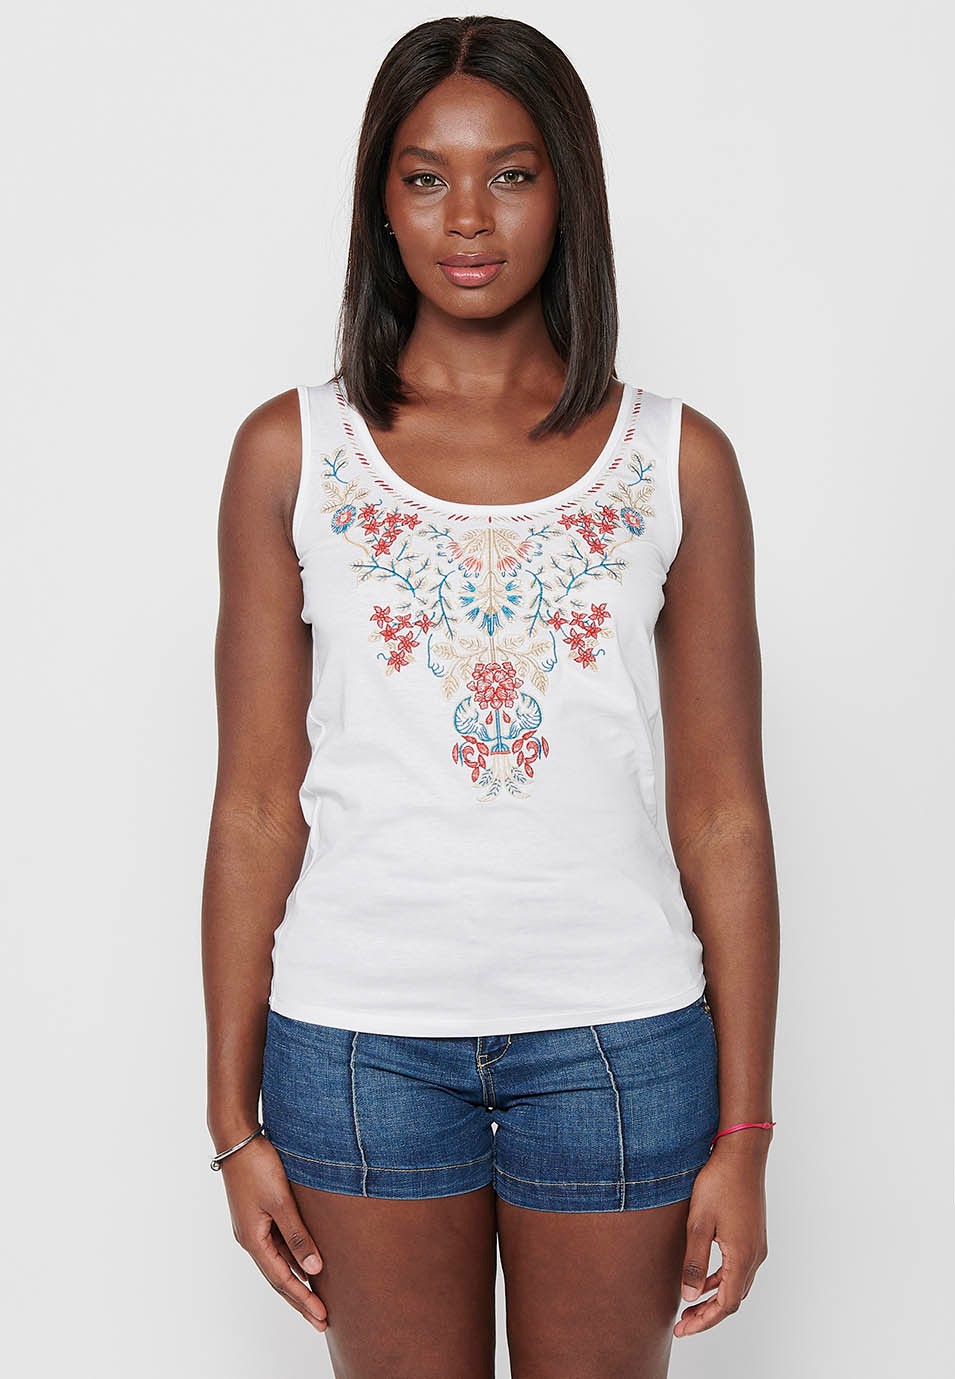 Sleeveless T-shirt, round neckline and front embroidery, White color for women